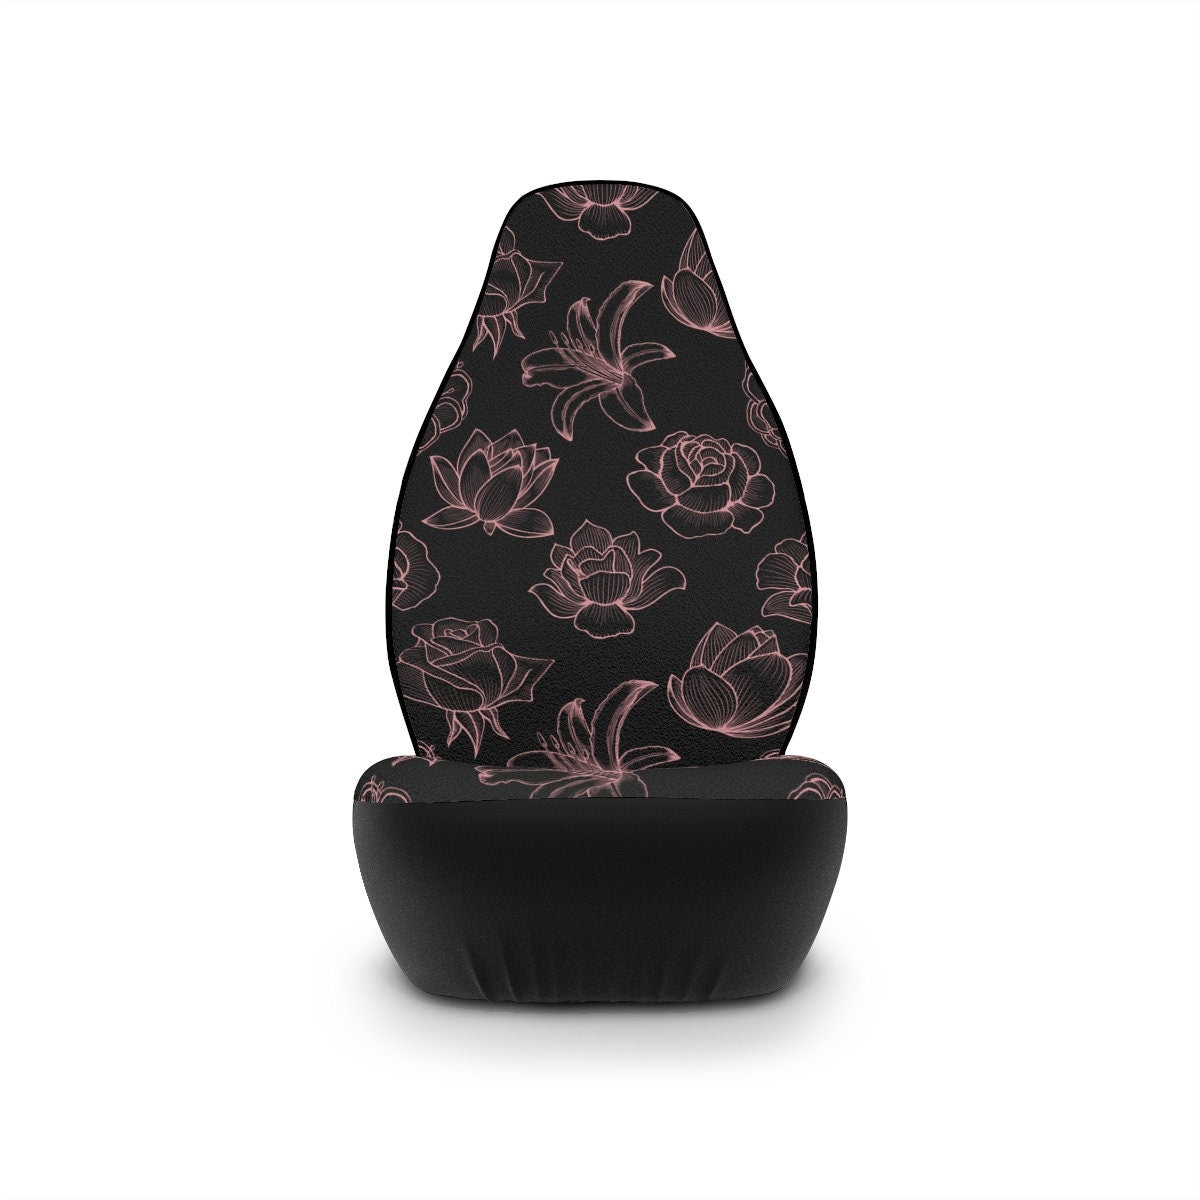 Pink Seat Covers for Cars, Car Seat Cover, Boho Flowers Hippie Car Accessories for Women, Floral Butterfly Universal Vehicle Seat Protectors